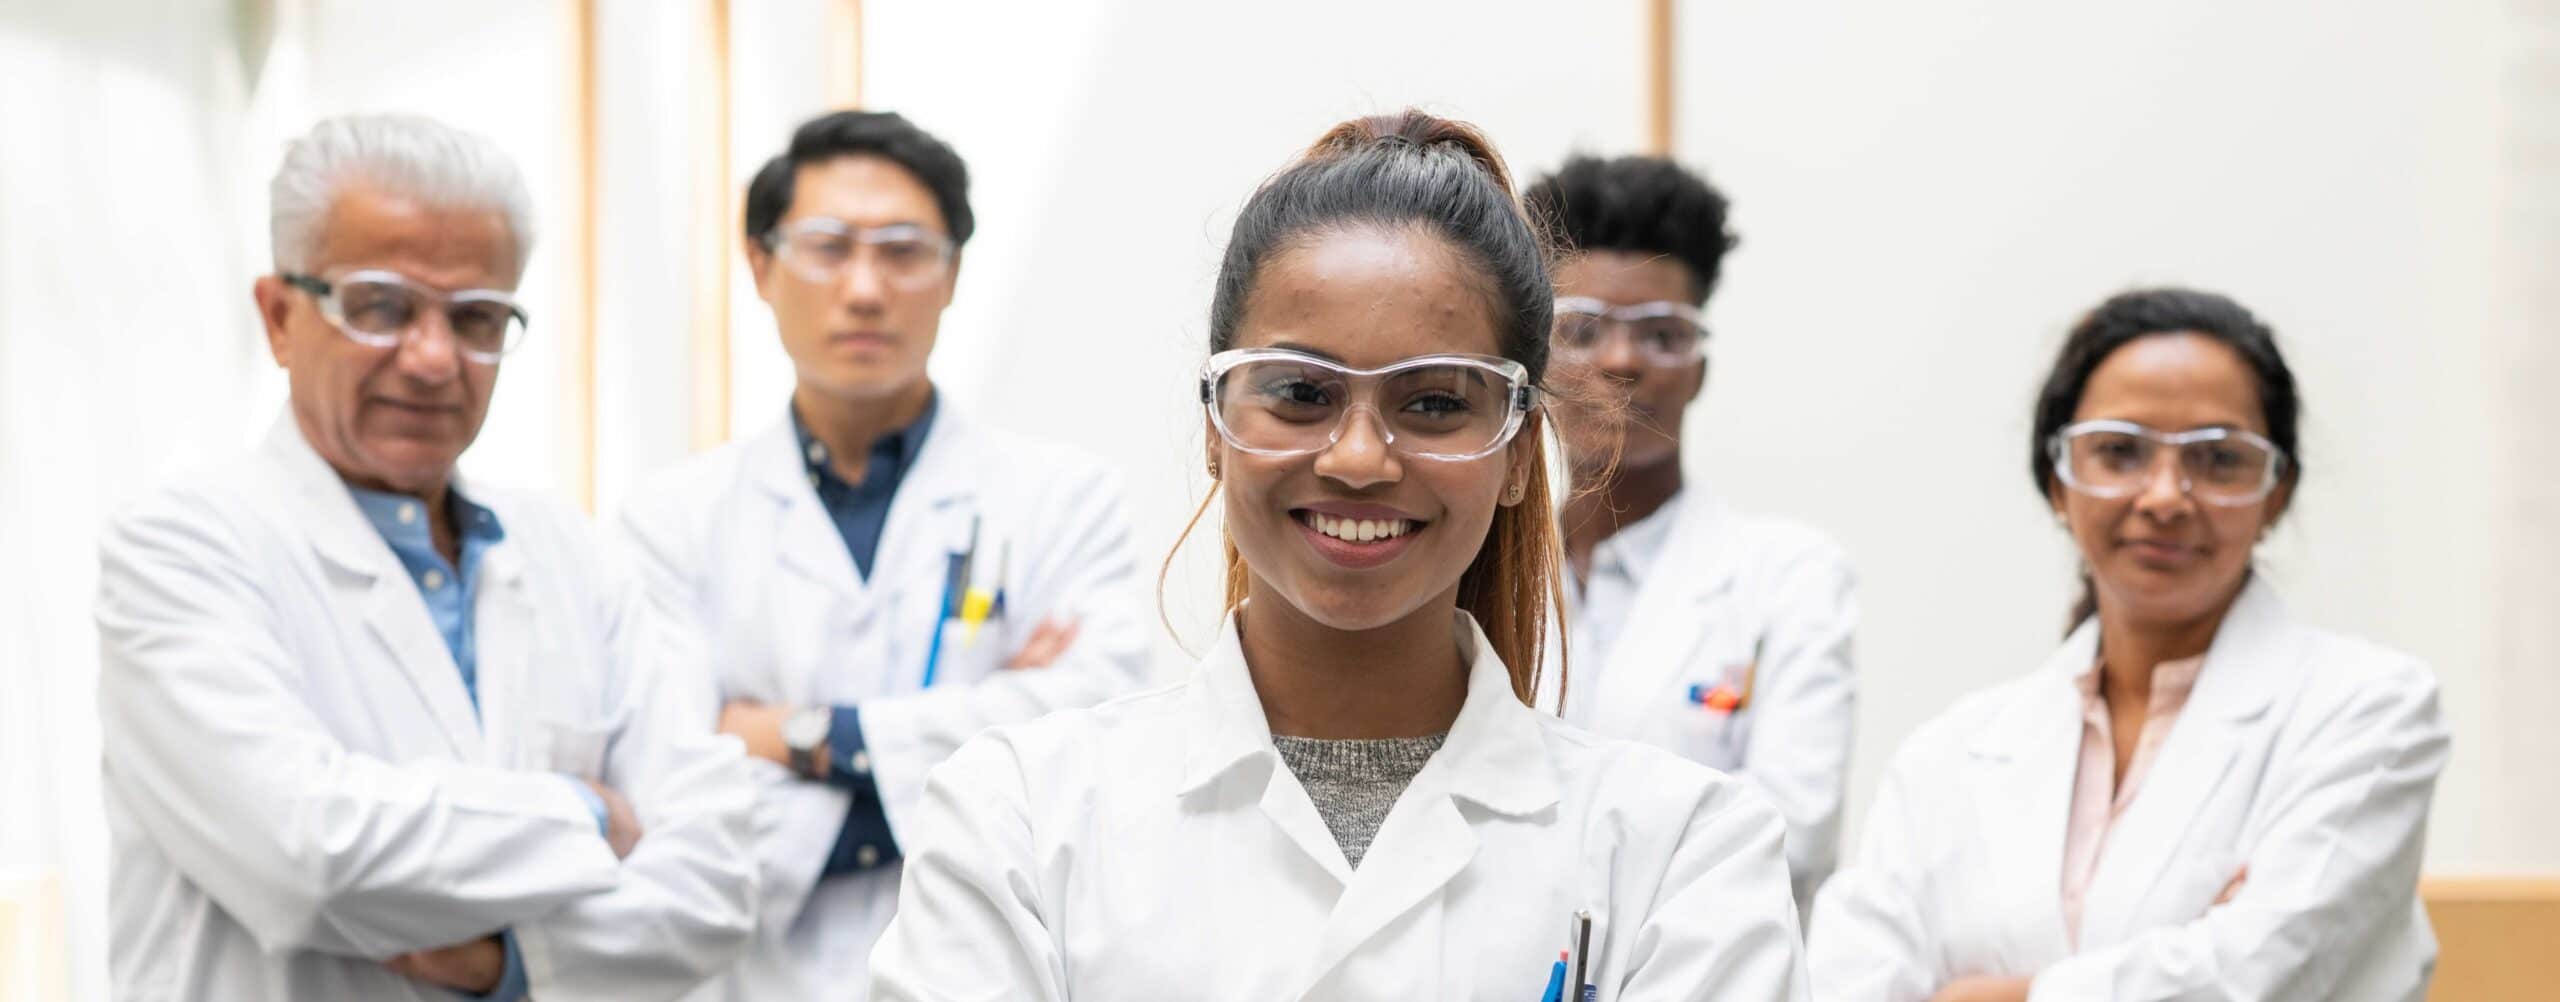 A multi-ethnic group of medical scientists stop and pause for a team portrait before continuing their work. They are each smiling while wearing lab coats and protective eye wear for safety.